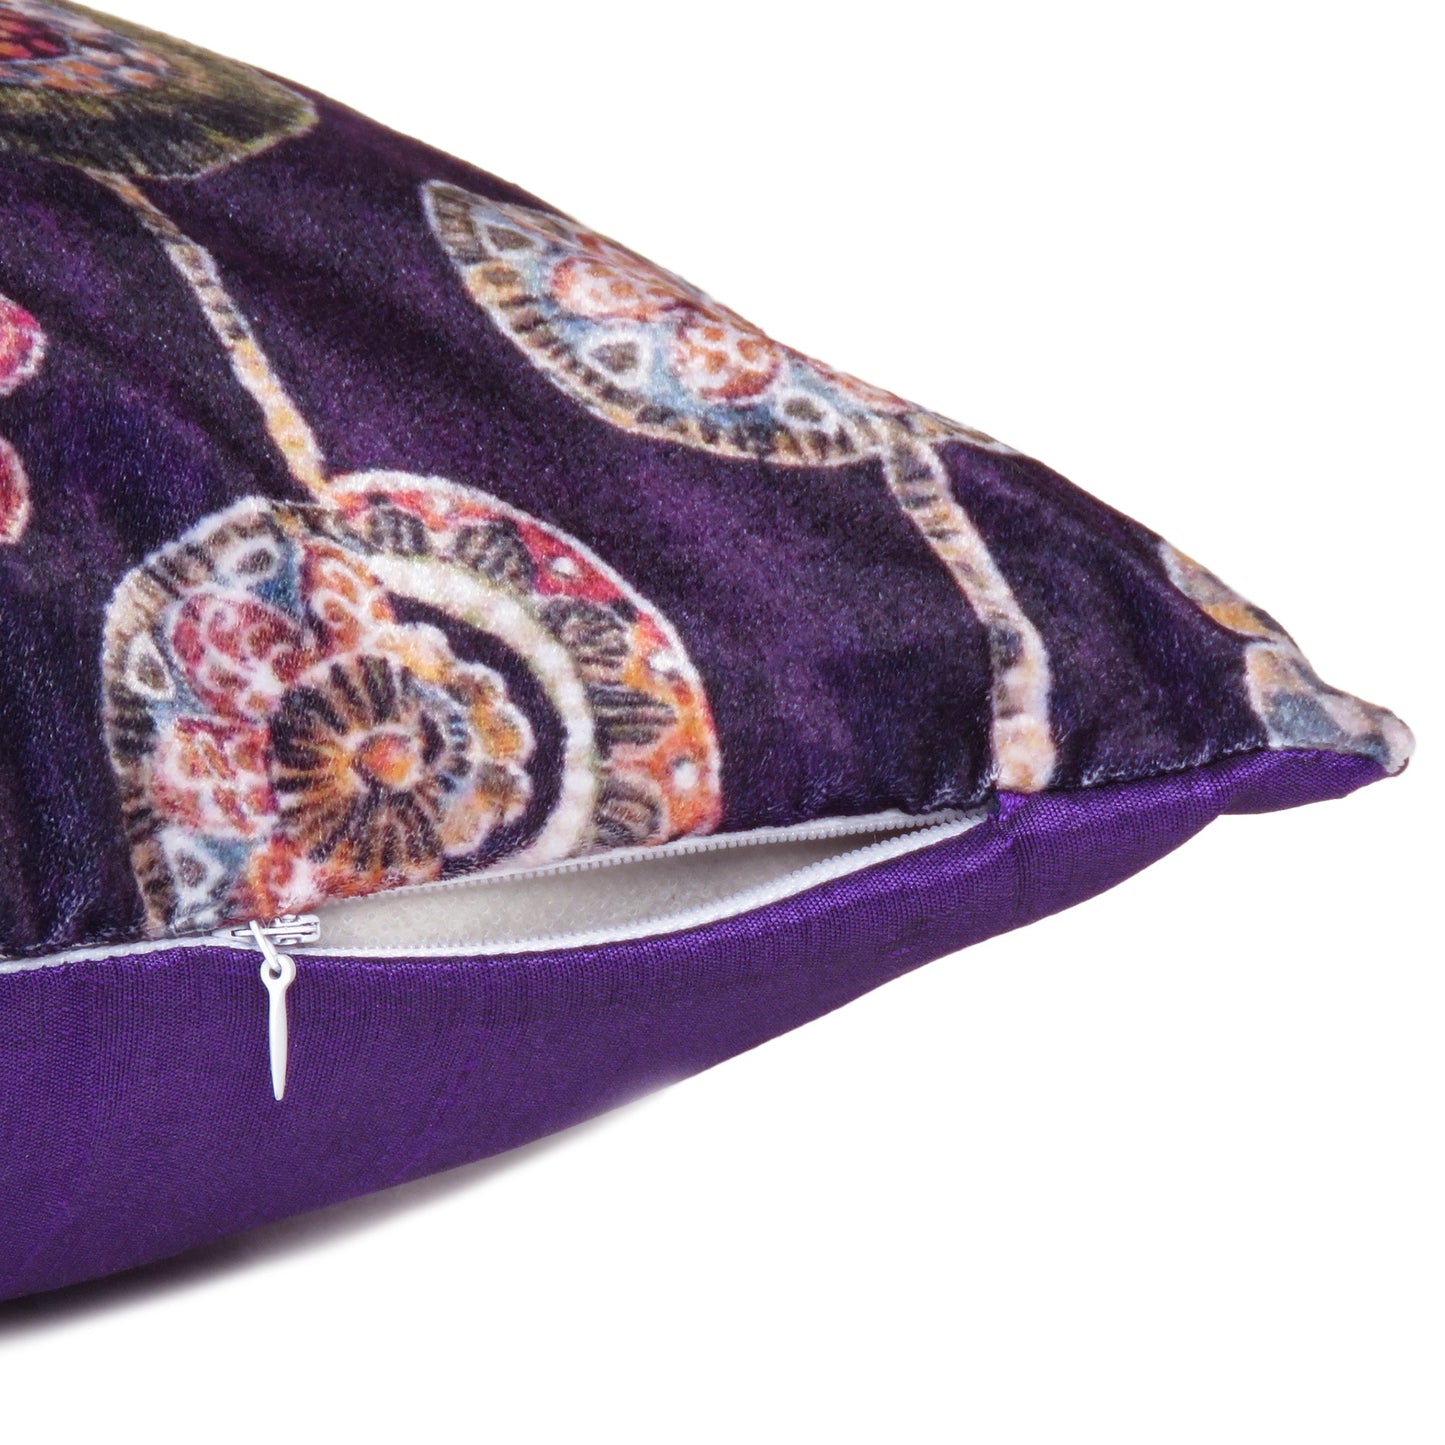 Velvet Polydupion Printed Cushion Covers in Set of 2 - Purple